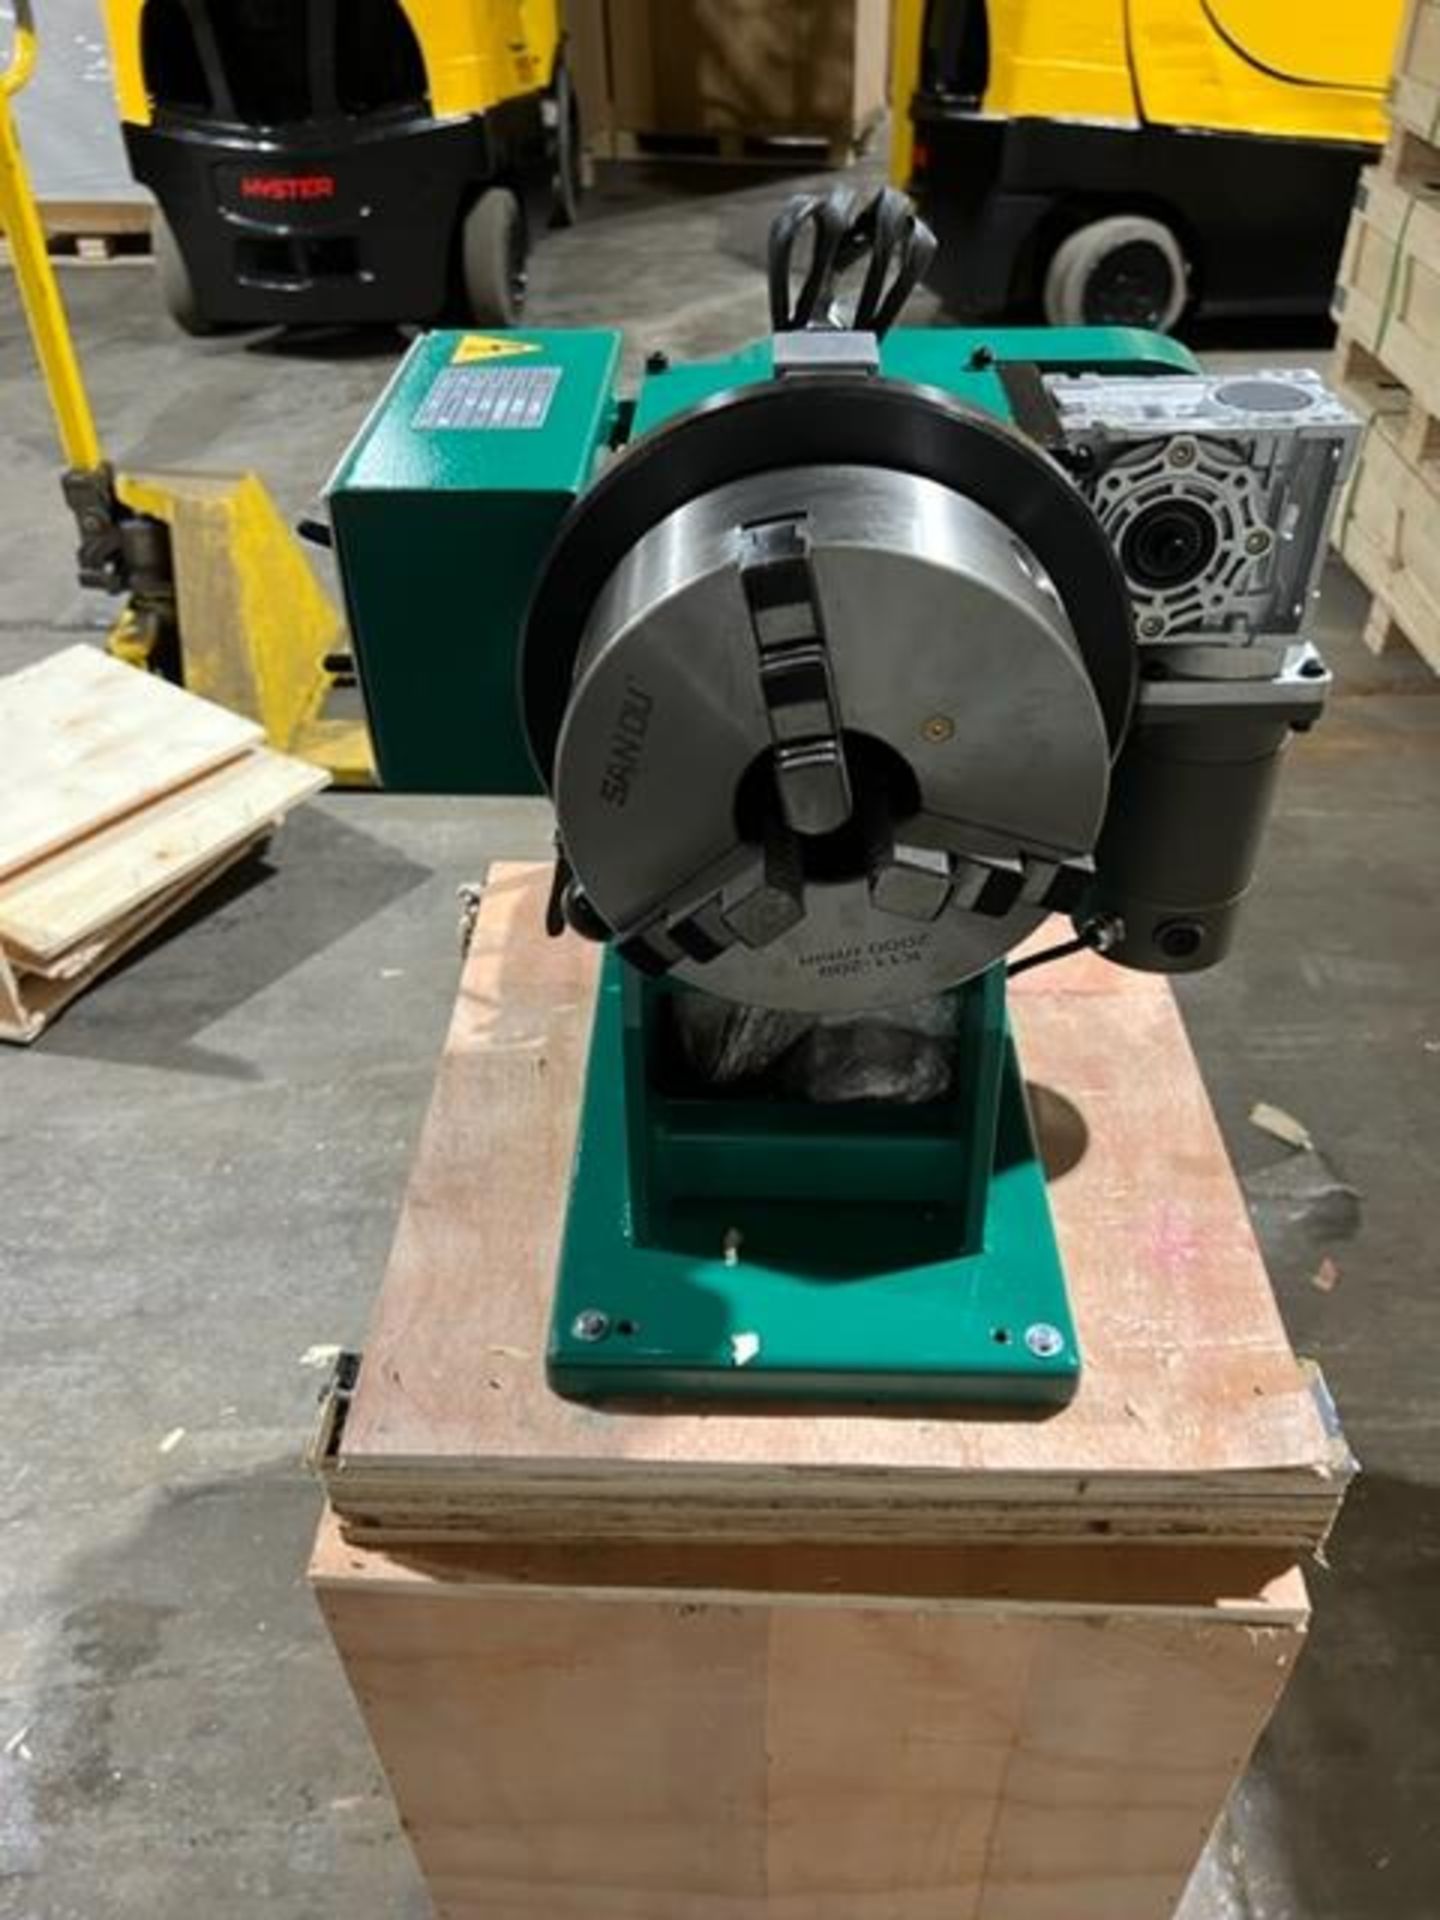 Verner model VD-250 WELDING POSITIONER 250lbs capacity - variable speed with foot pedal control - - Image 3 of 5